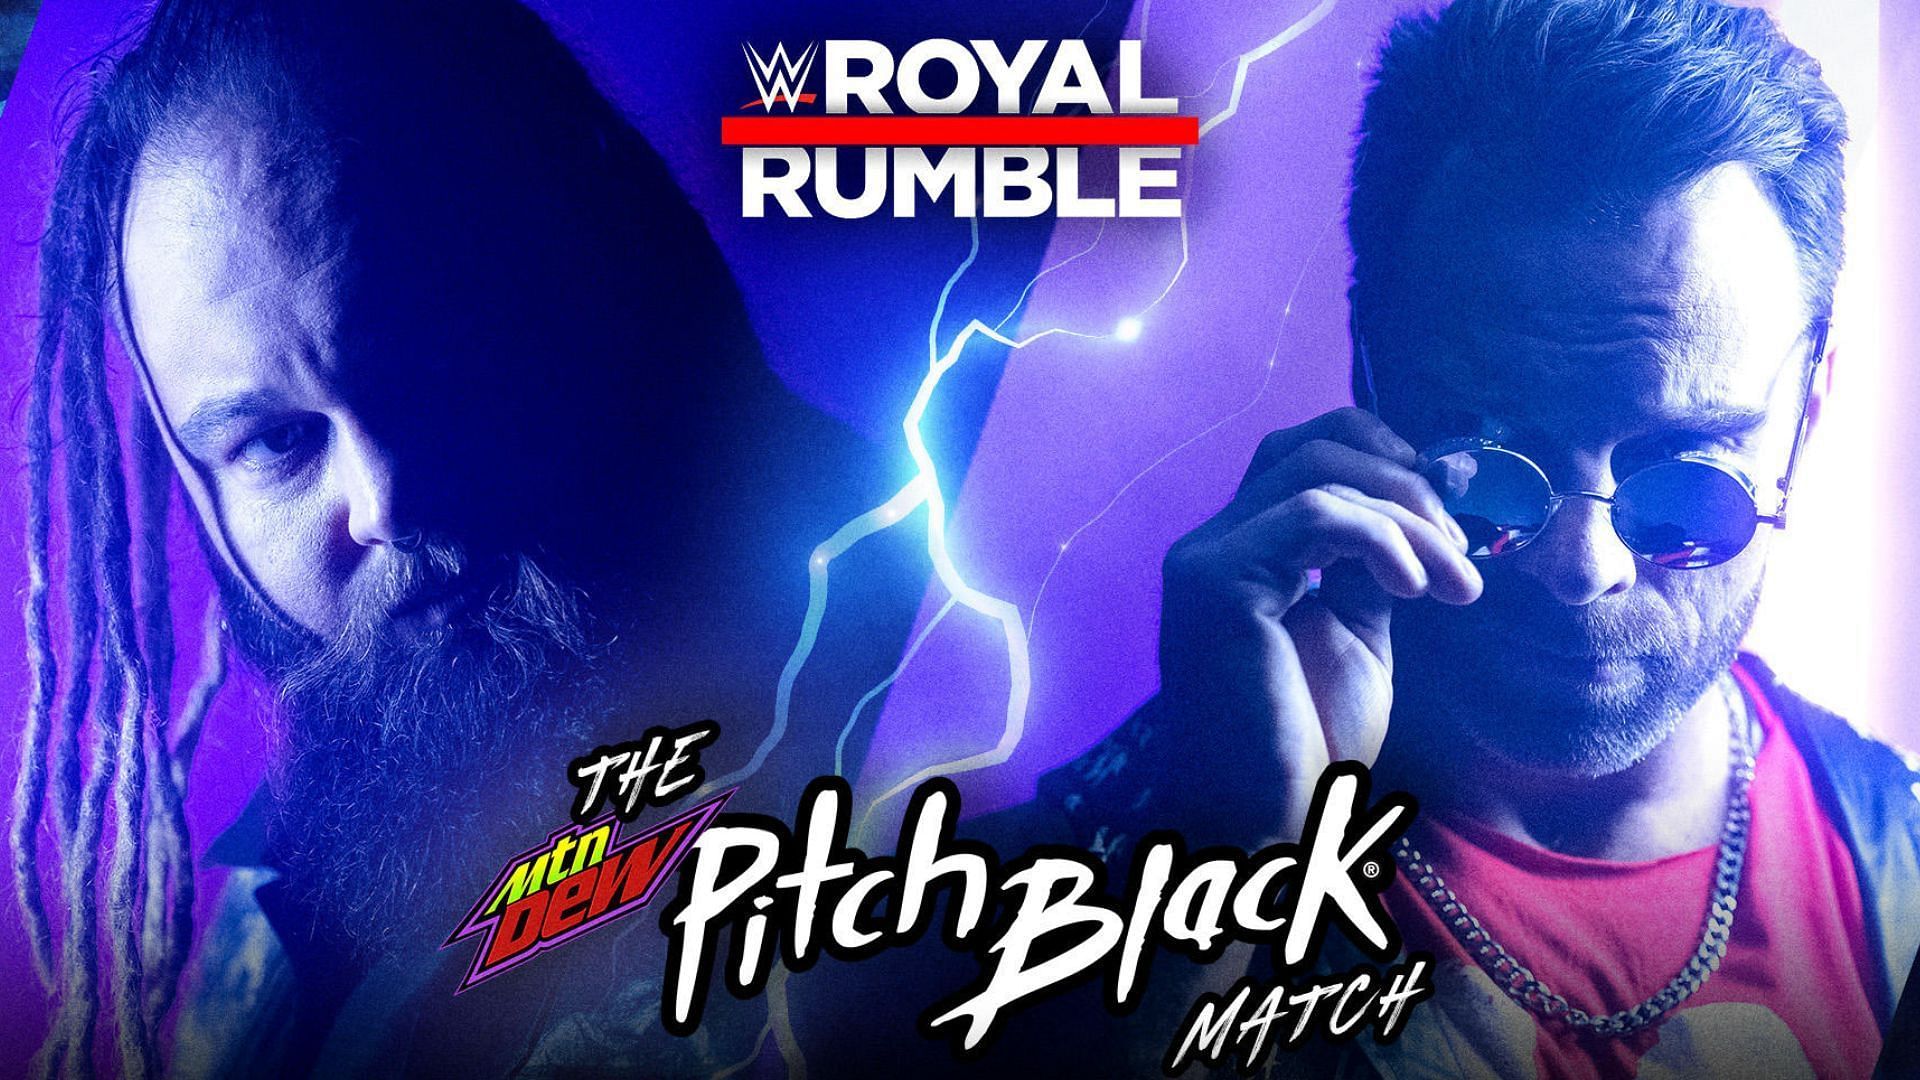 Bray Wyatt and LA Knight will compete in the first-ever Mountain Dew Pitch Black match